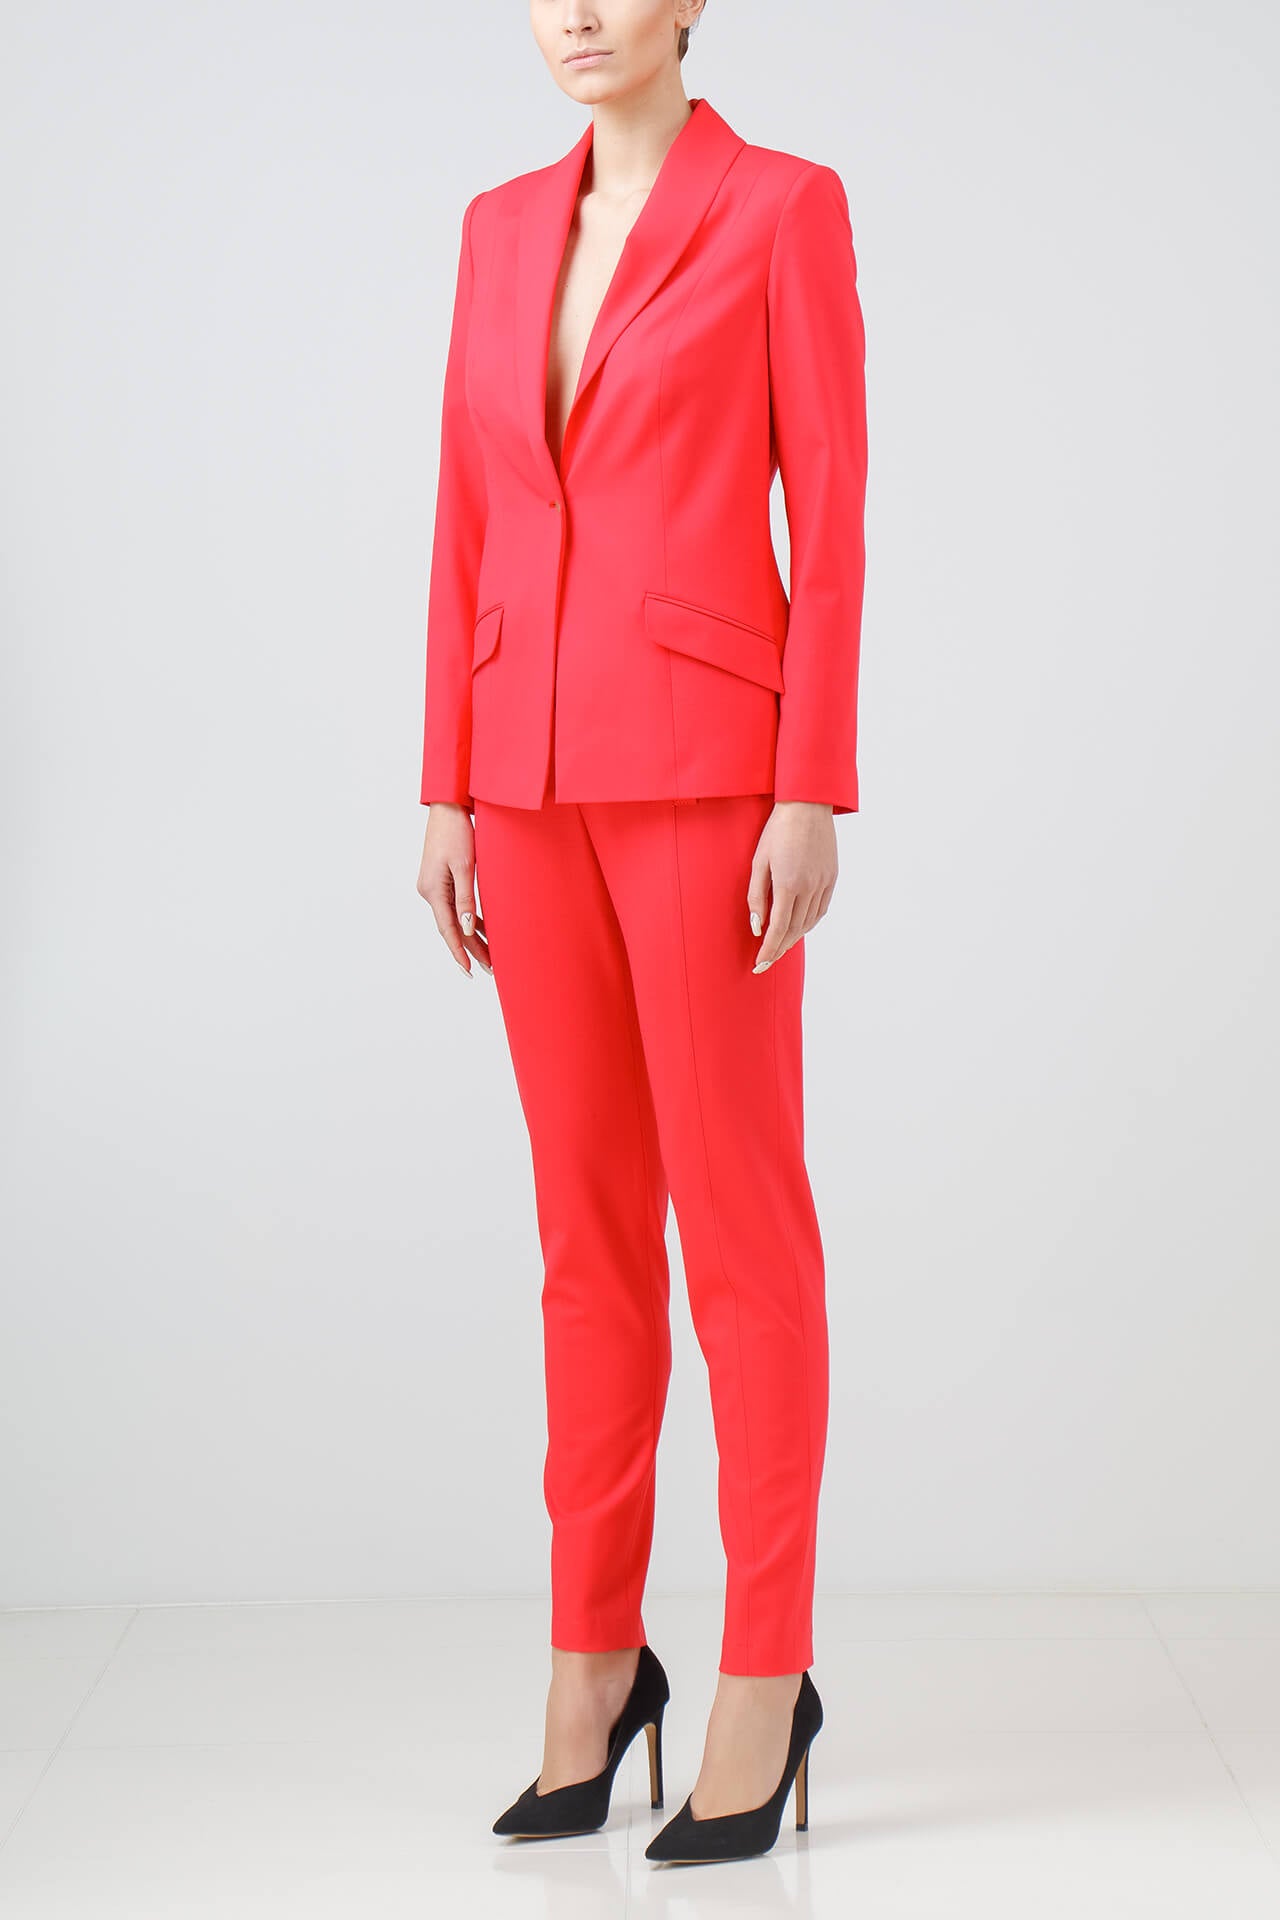 https://cdn.shopify.com/s/files/1/1145/3124/products/Stretch_wool_coral_pantsuit2_2000x.jpg?v=1690191908